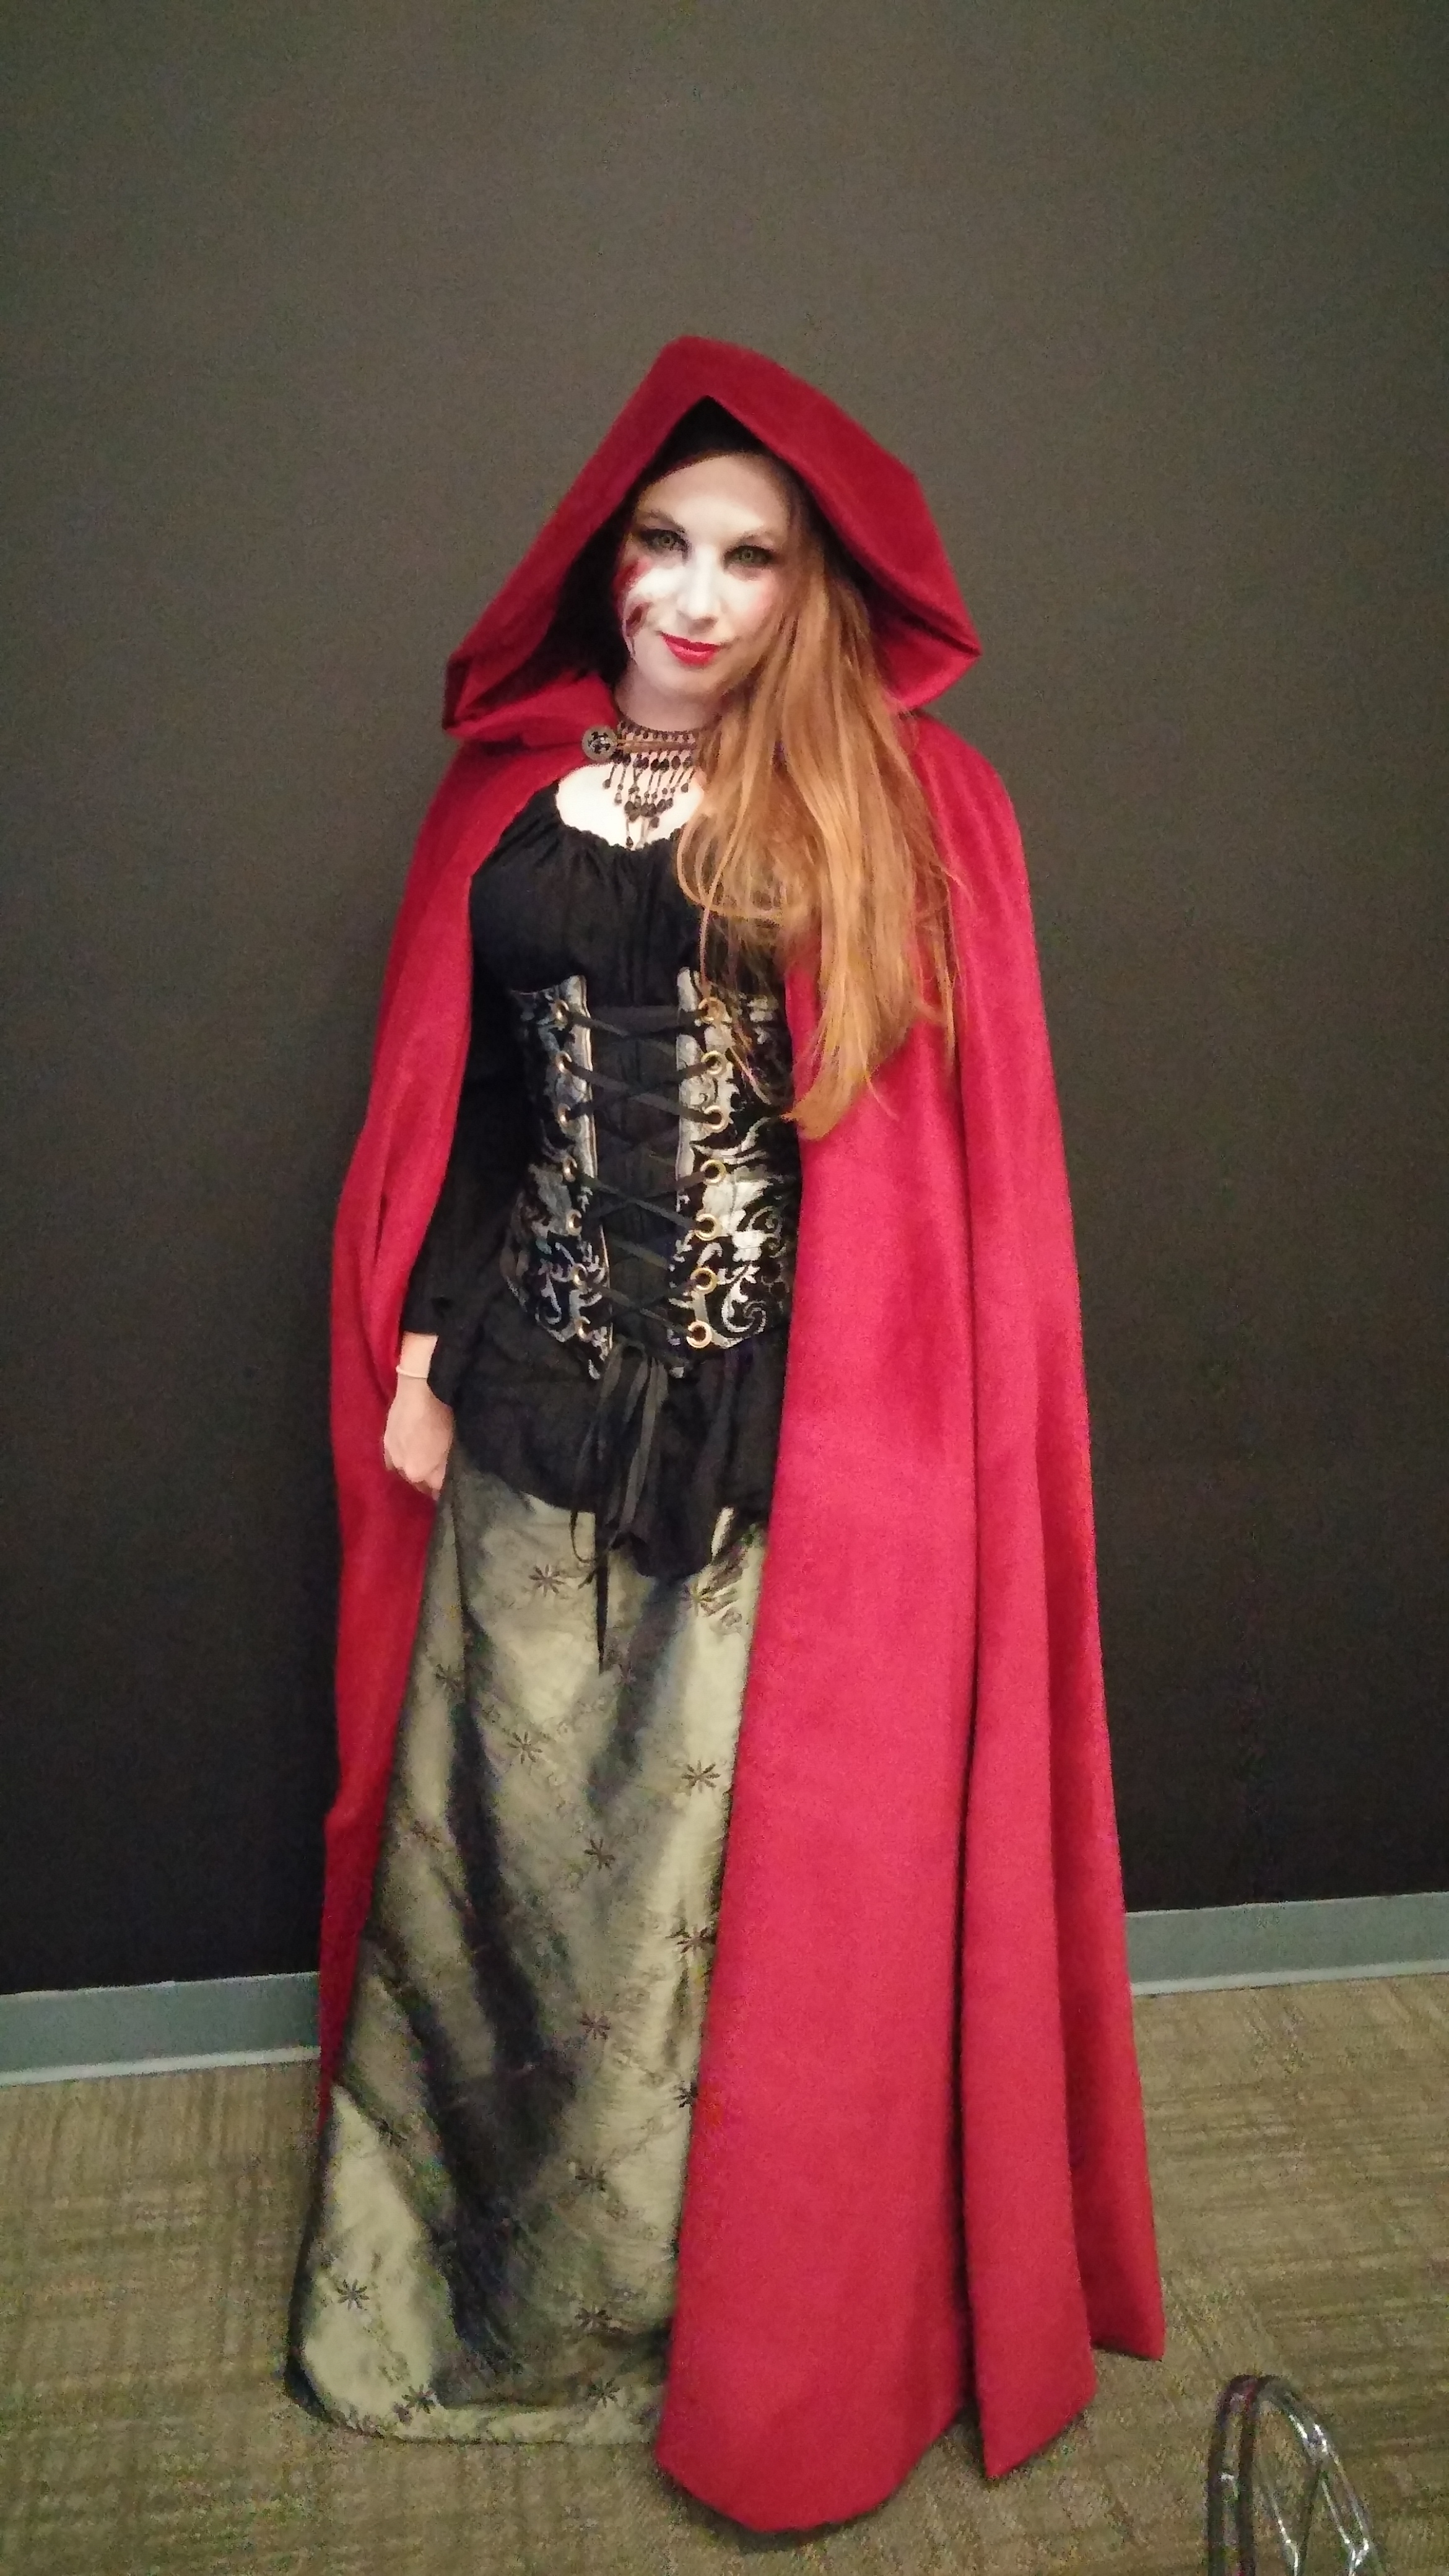 Danielle was Little Red Riding Hood post-wolf attack!